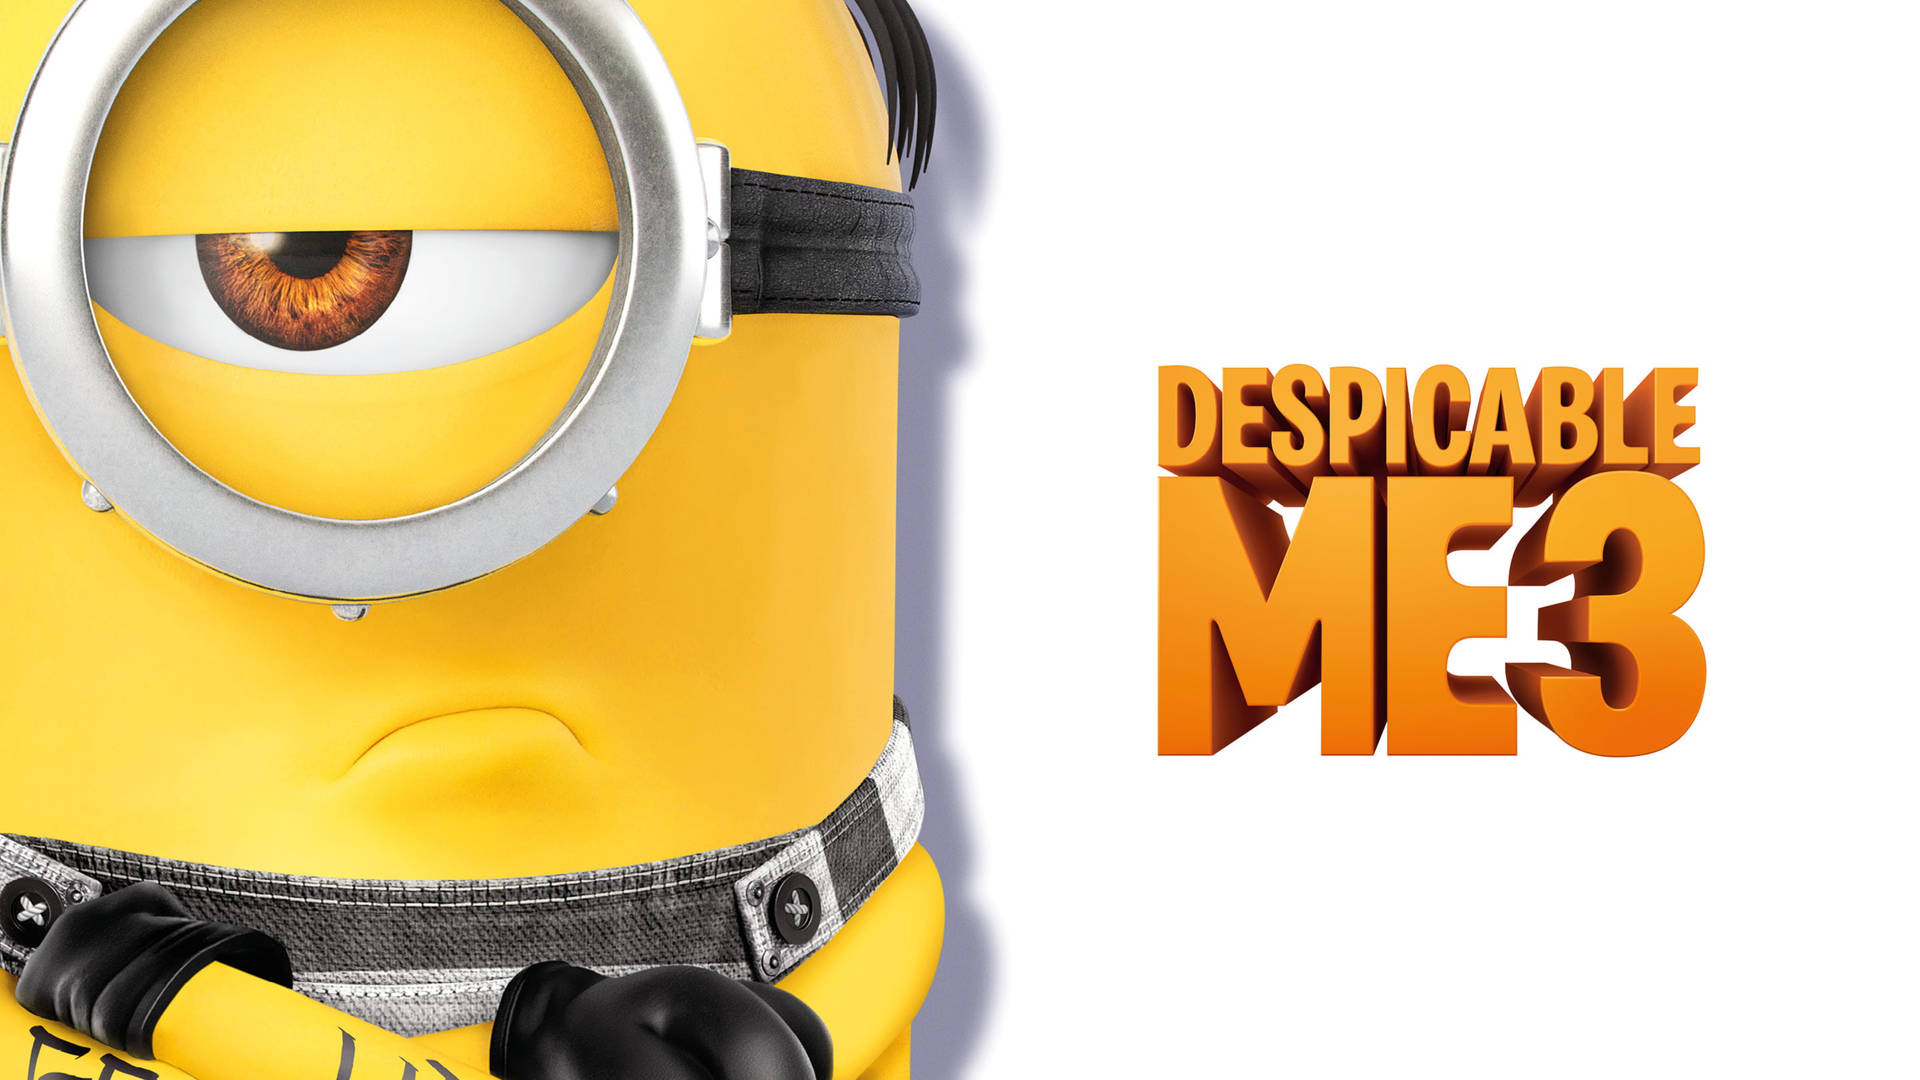 Despicable Me 3 Movie Poster Background